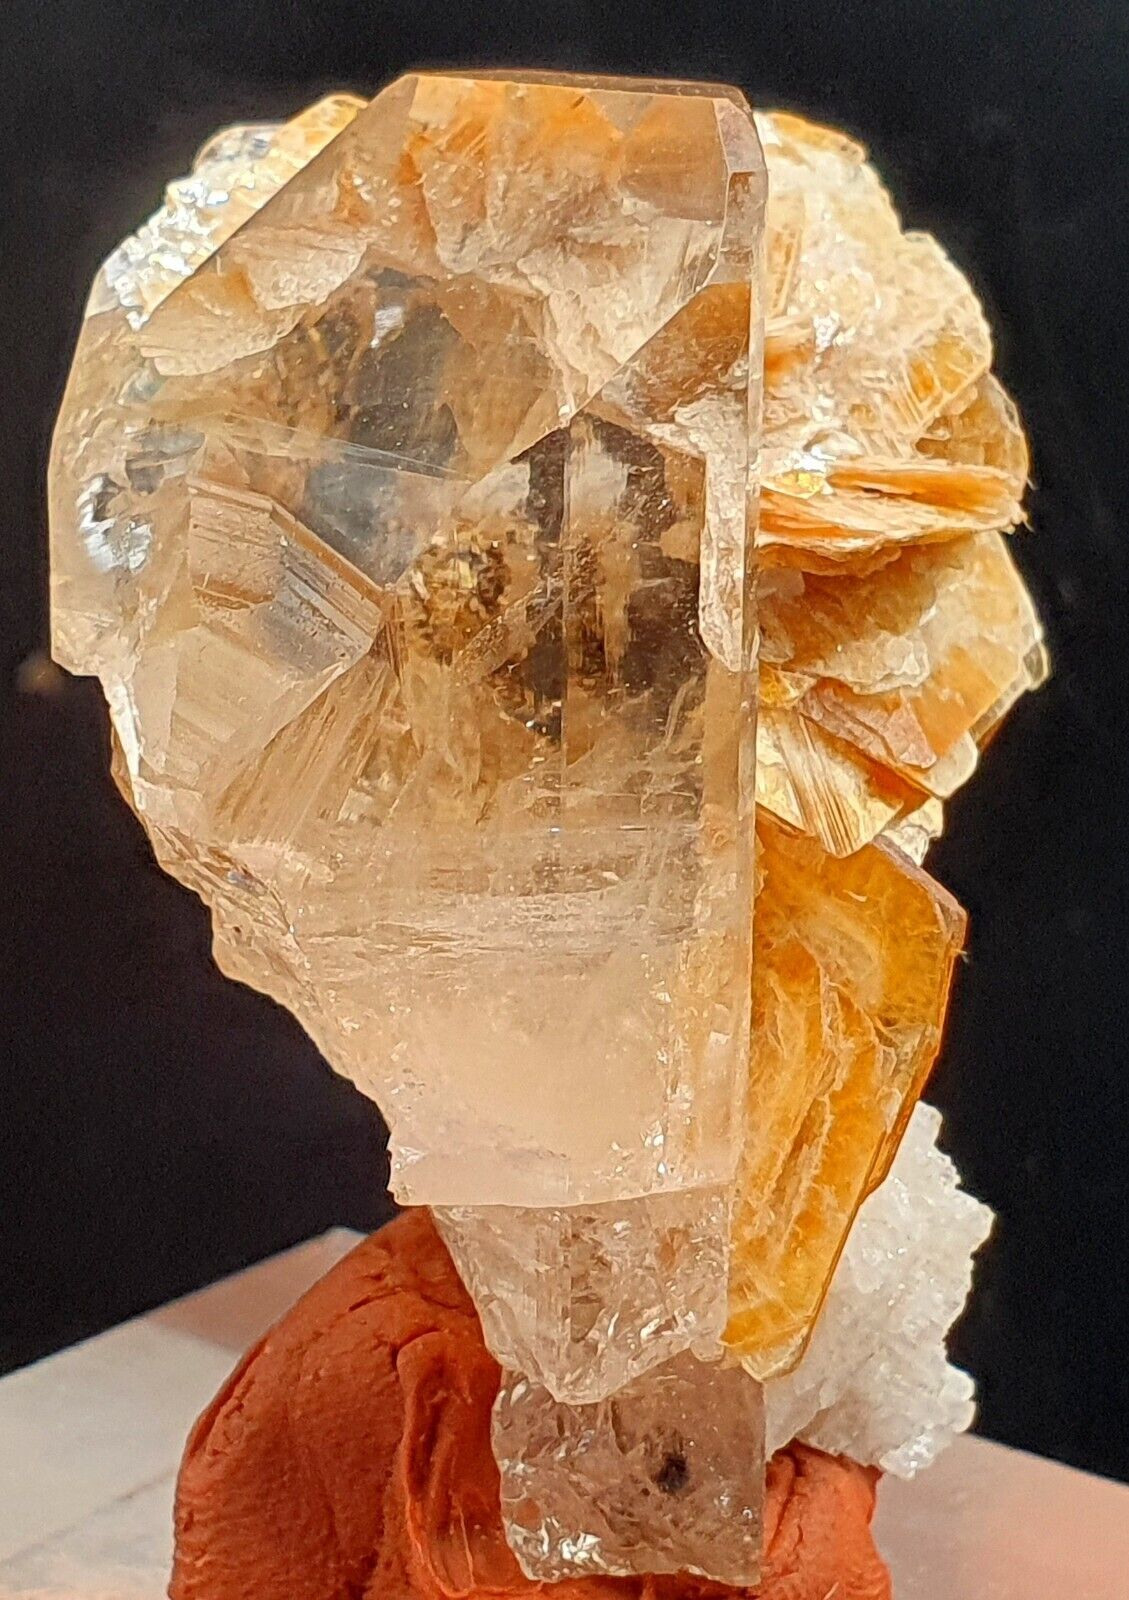 167 CT Undamaged Terminated Sherry Brown Topaz Crystal With Mica Specimen